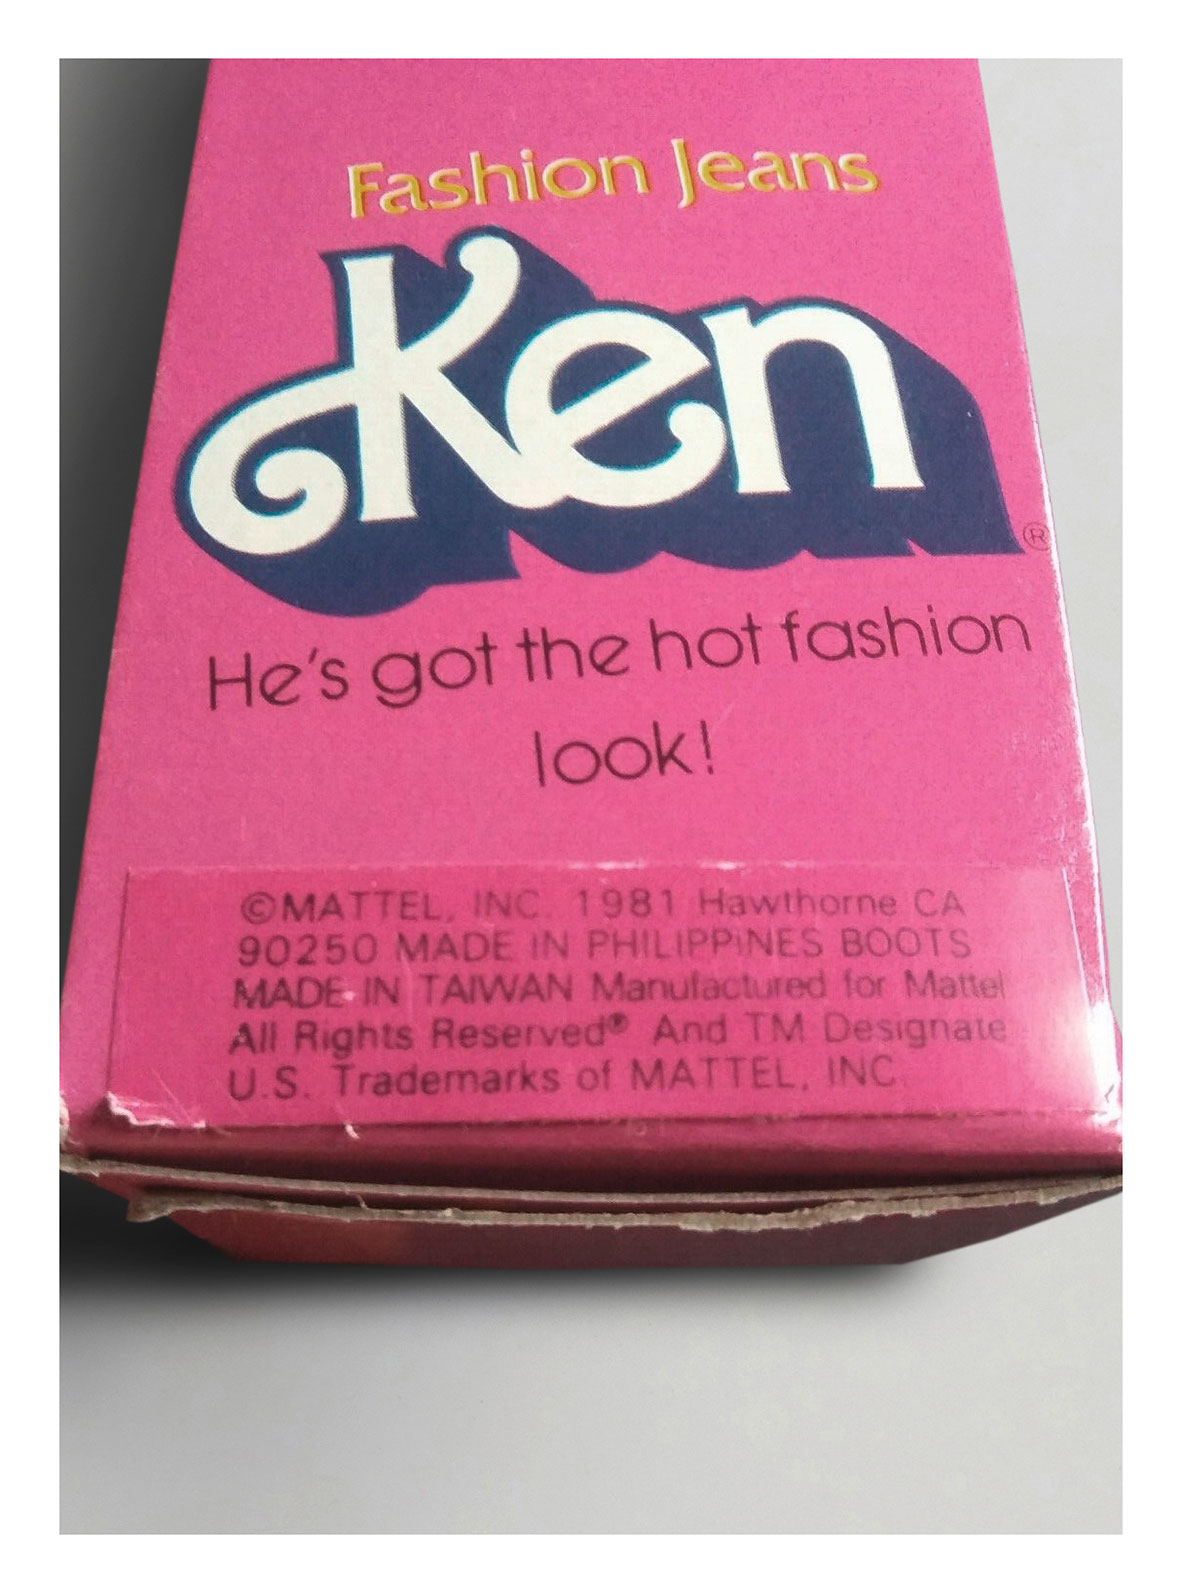 1982 #5316 Fashion Jeans Ken (Made in Philippines) original packaging